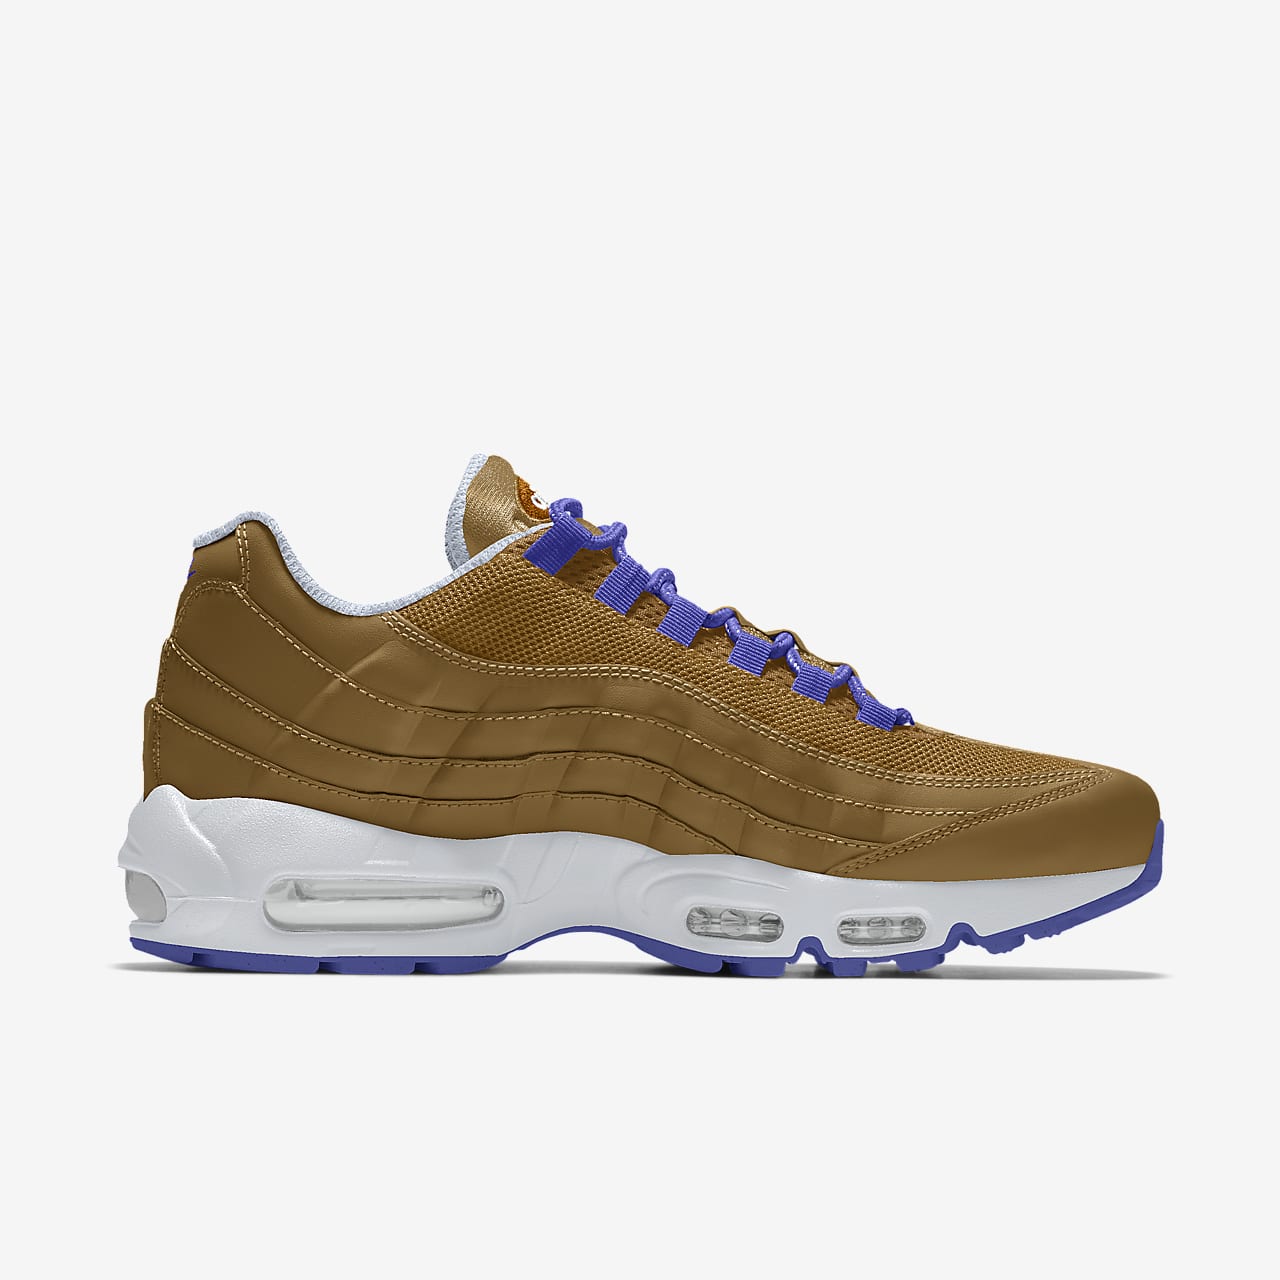 NIKE AIRMAX 95 By you